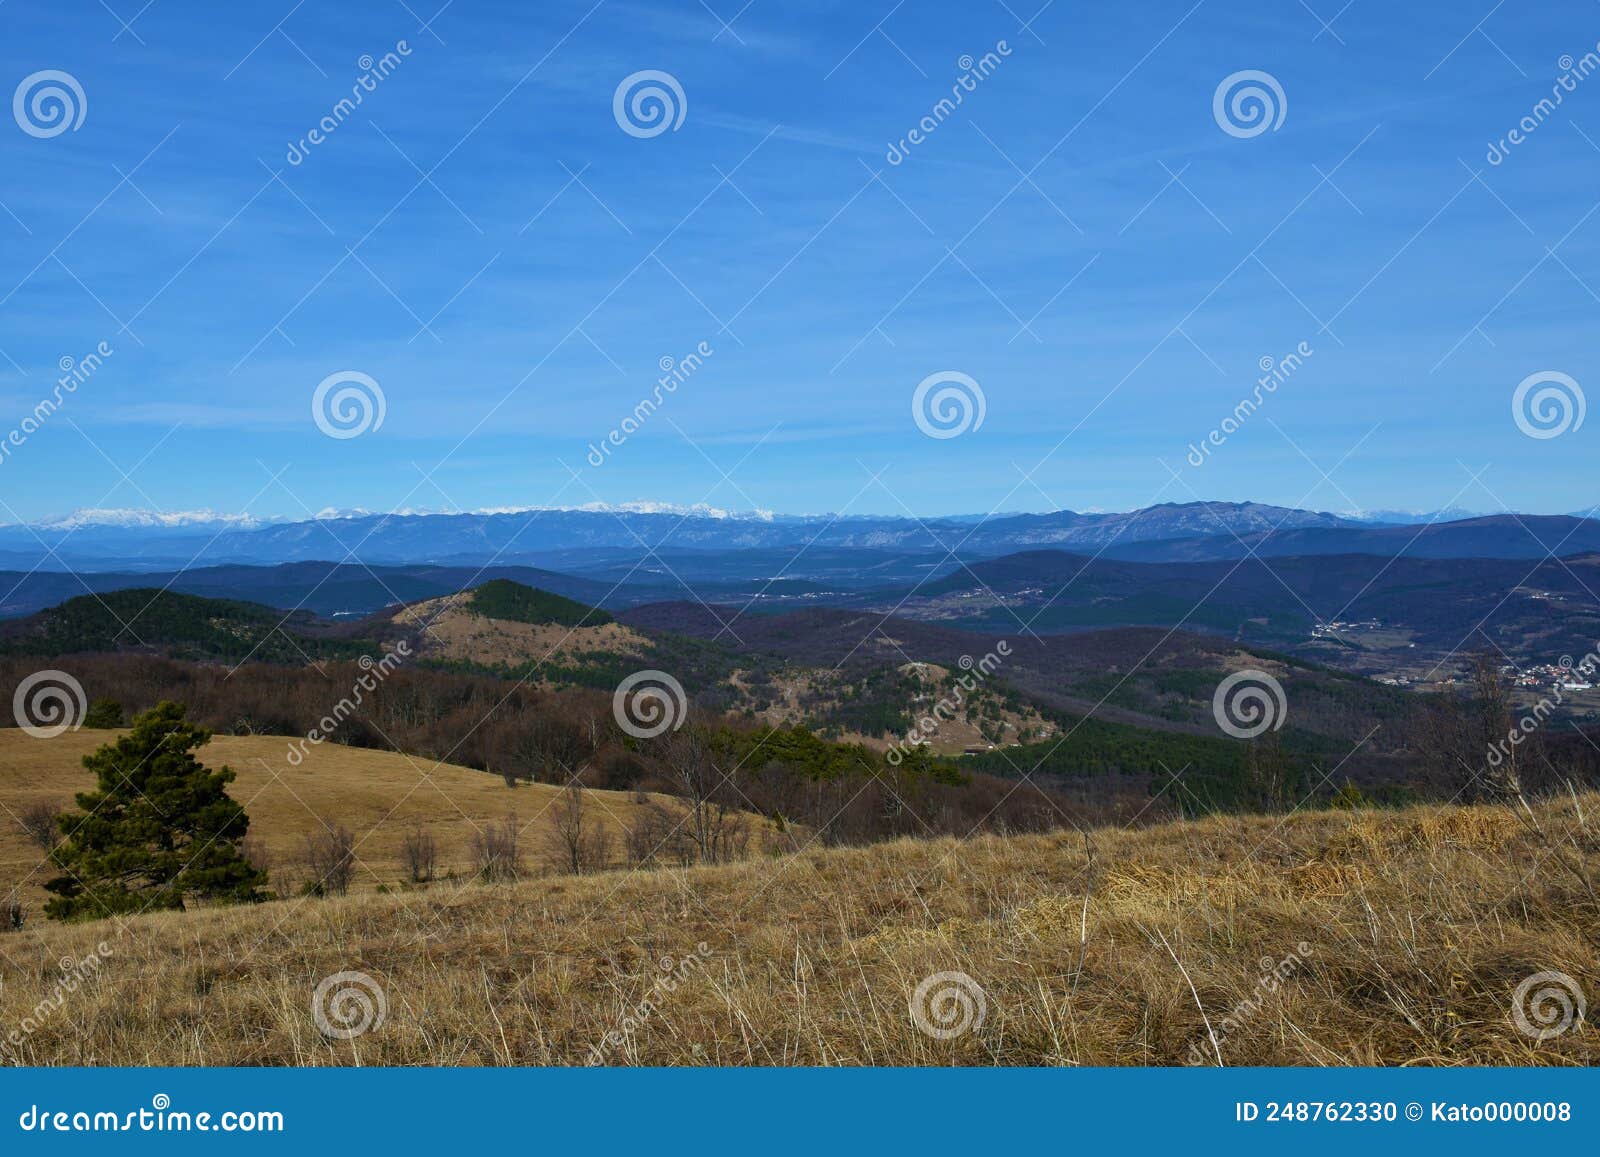 view of slovene littoral region with nanos and golaki mountains